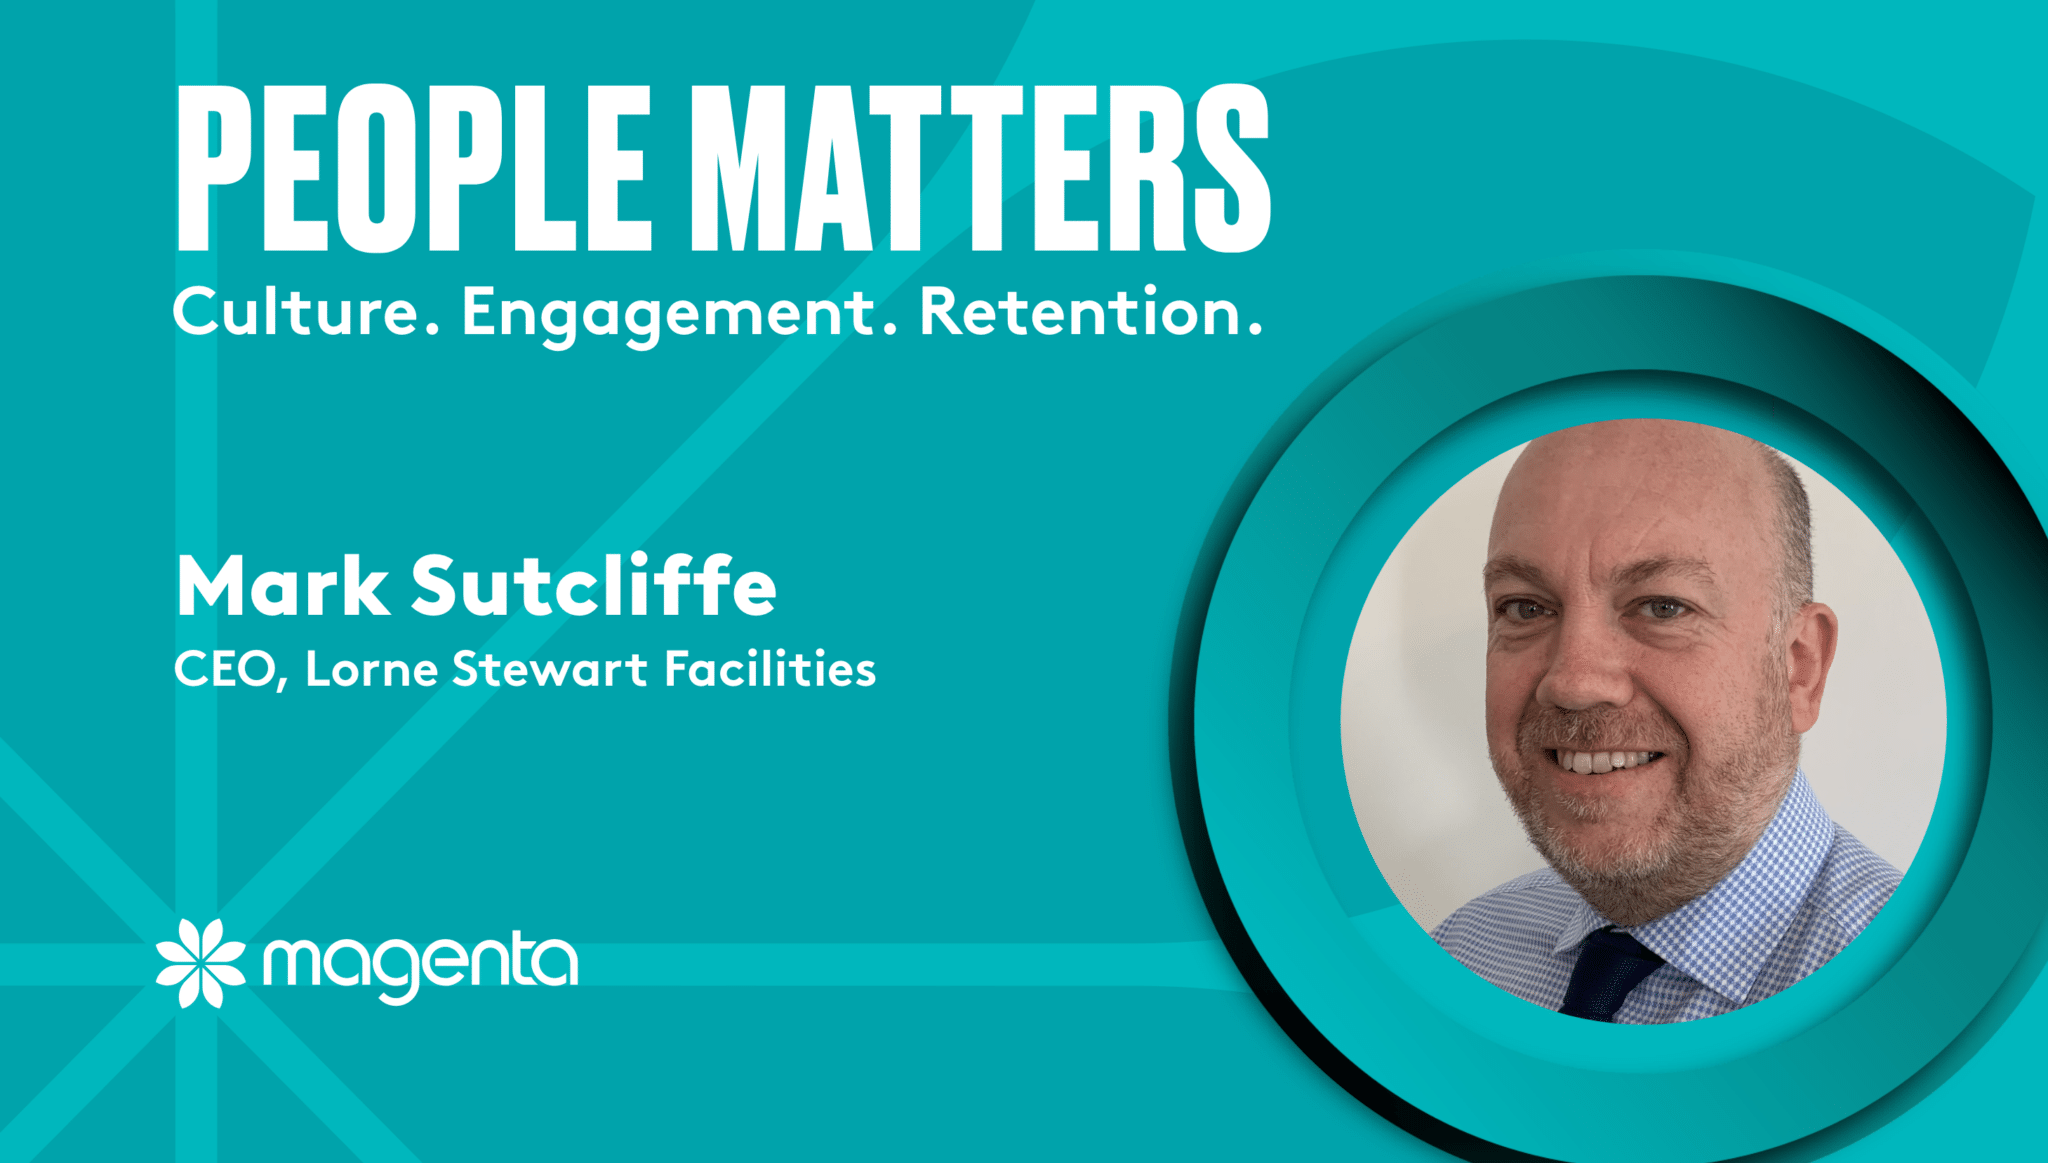 Mark Sutcliffe, CEO of Lorne Stewart, on a green backdrop with the people matters blog logo.